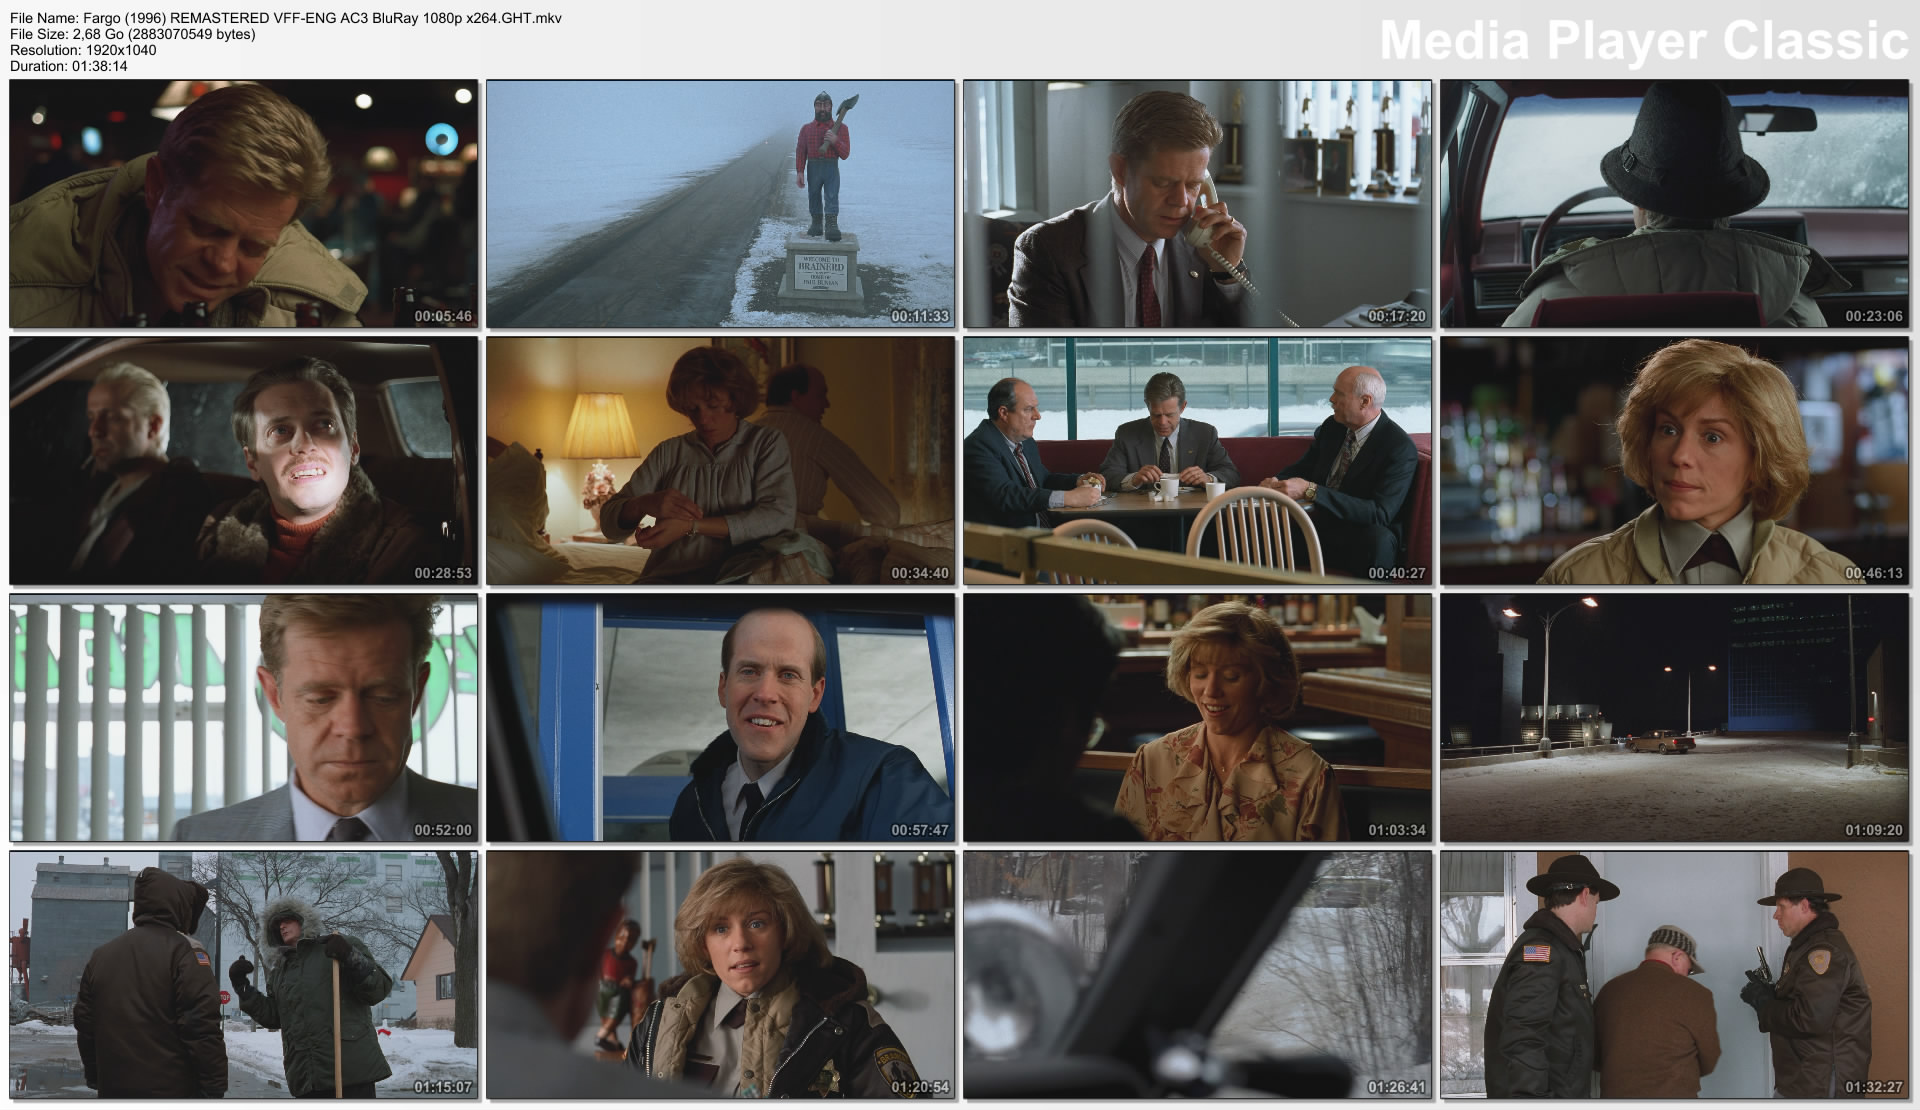 Fargo (1996) REMASTERED VFF-ENG AC3 BluRay 1080p x264.GHT